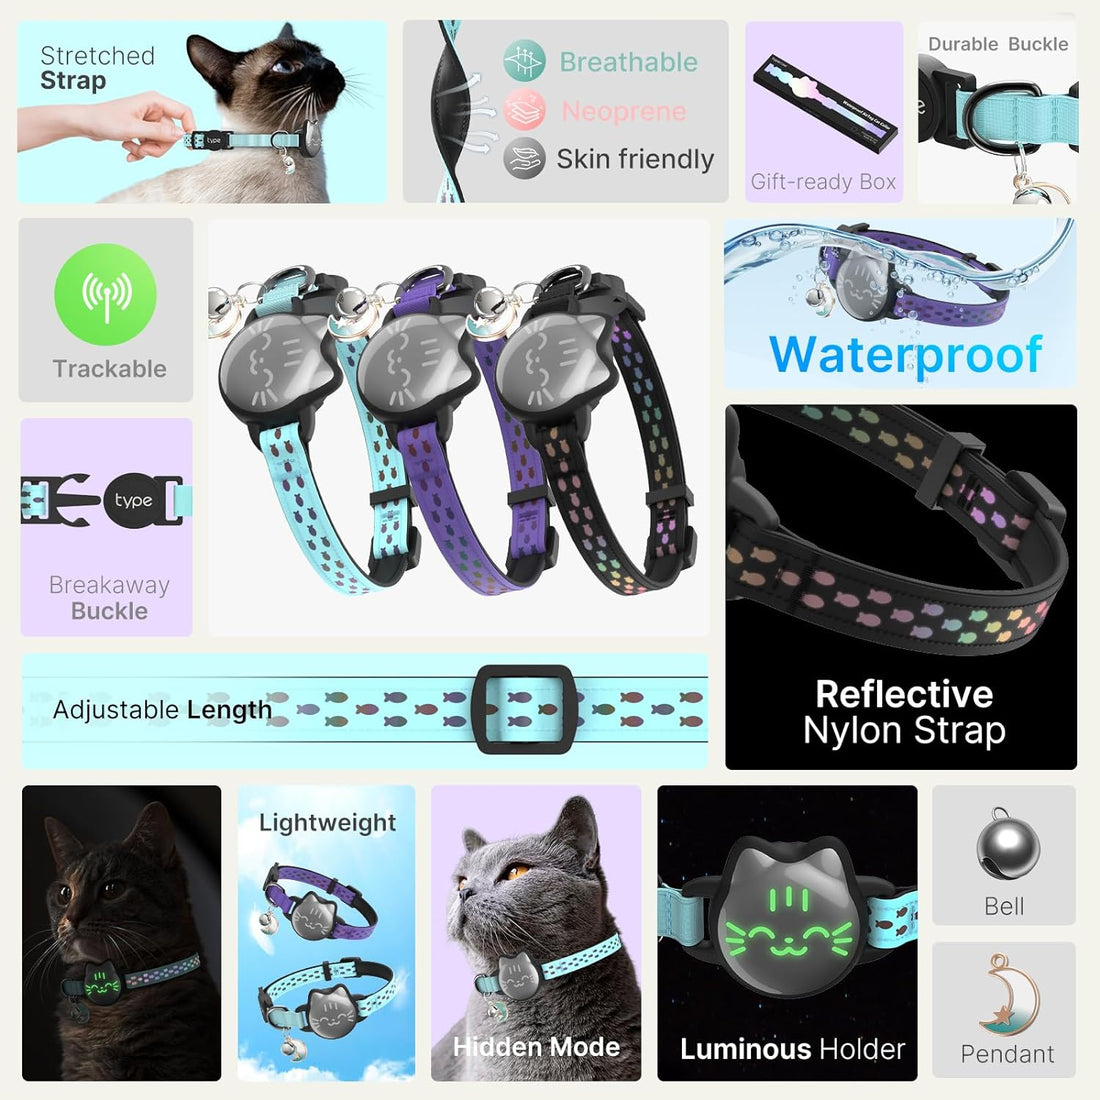 Waterproof Airtag Cat Collar, Breakaway Cat Airtag Collar with Luminous & Reflective Fish Pattern, Lightweight Kitten Collar for Apple Air tag, Hidden GPS Tracker Holder for Cats, Kittens (7-9")